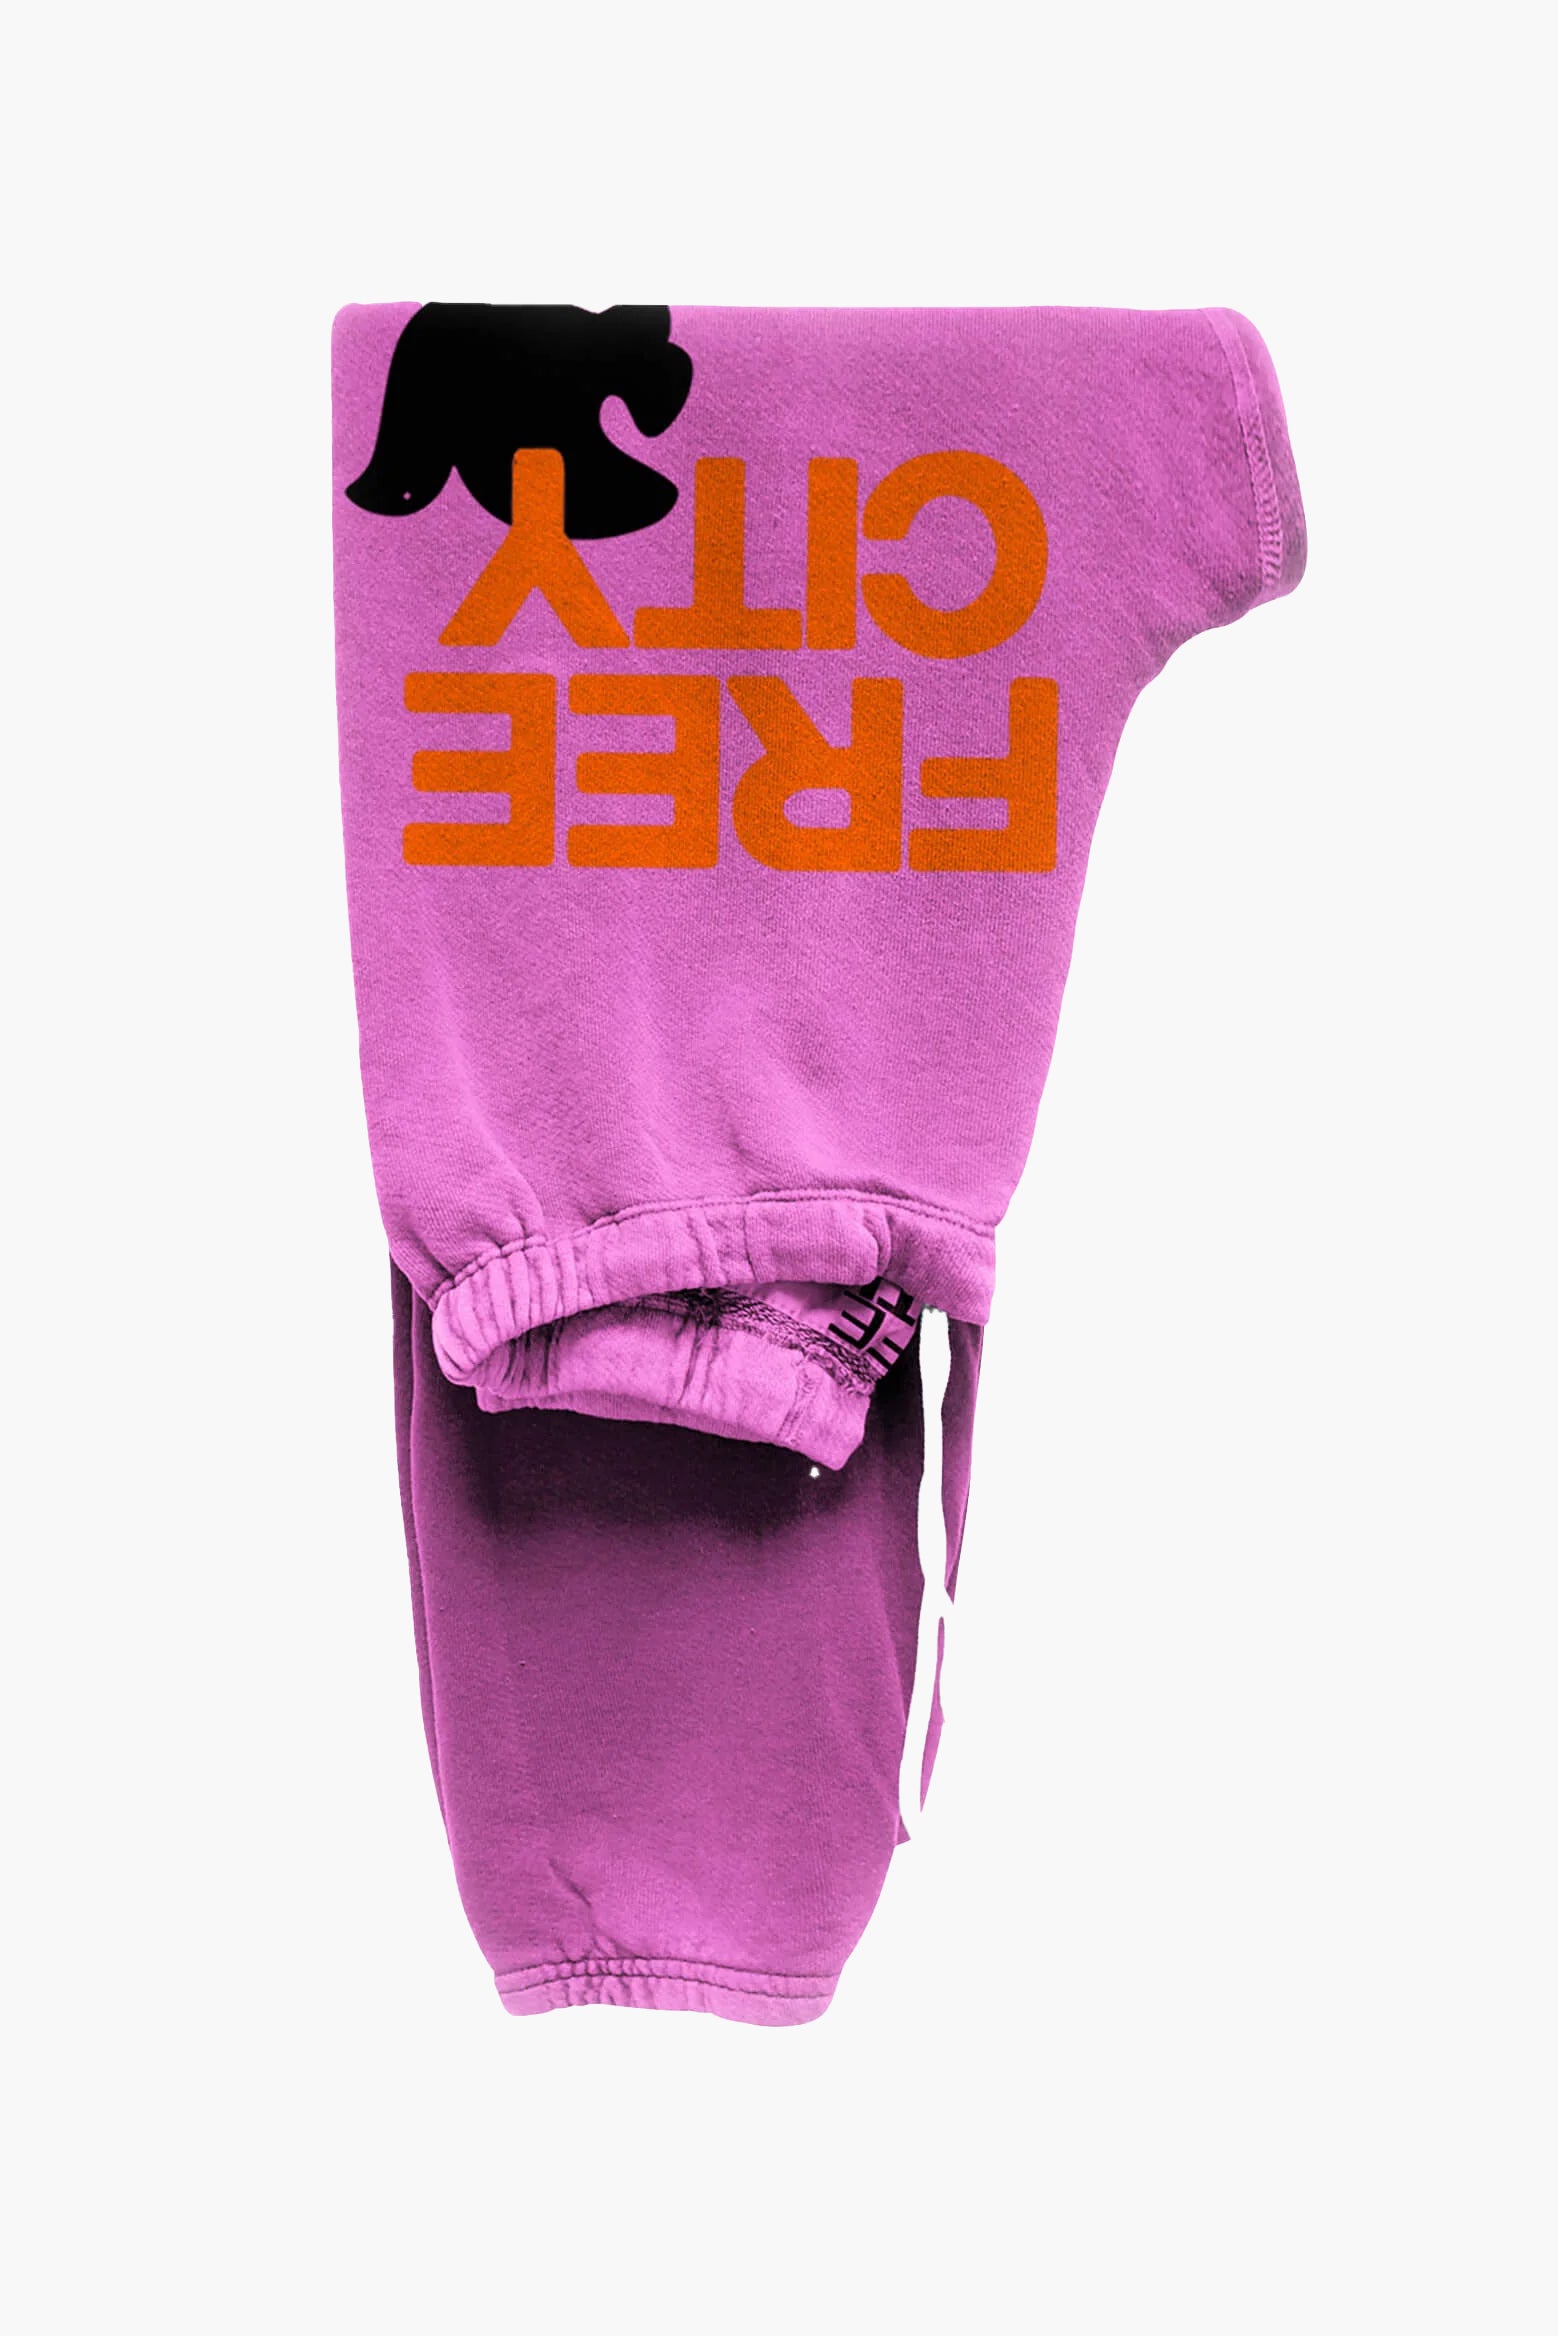 The FREECITY Large Sweatpant in Pink Plant available at The New Trend